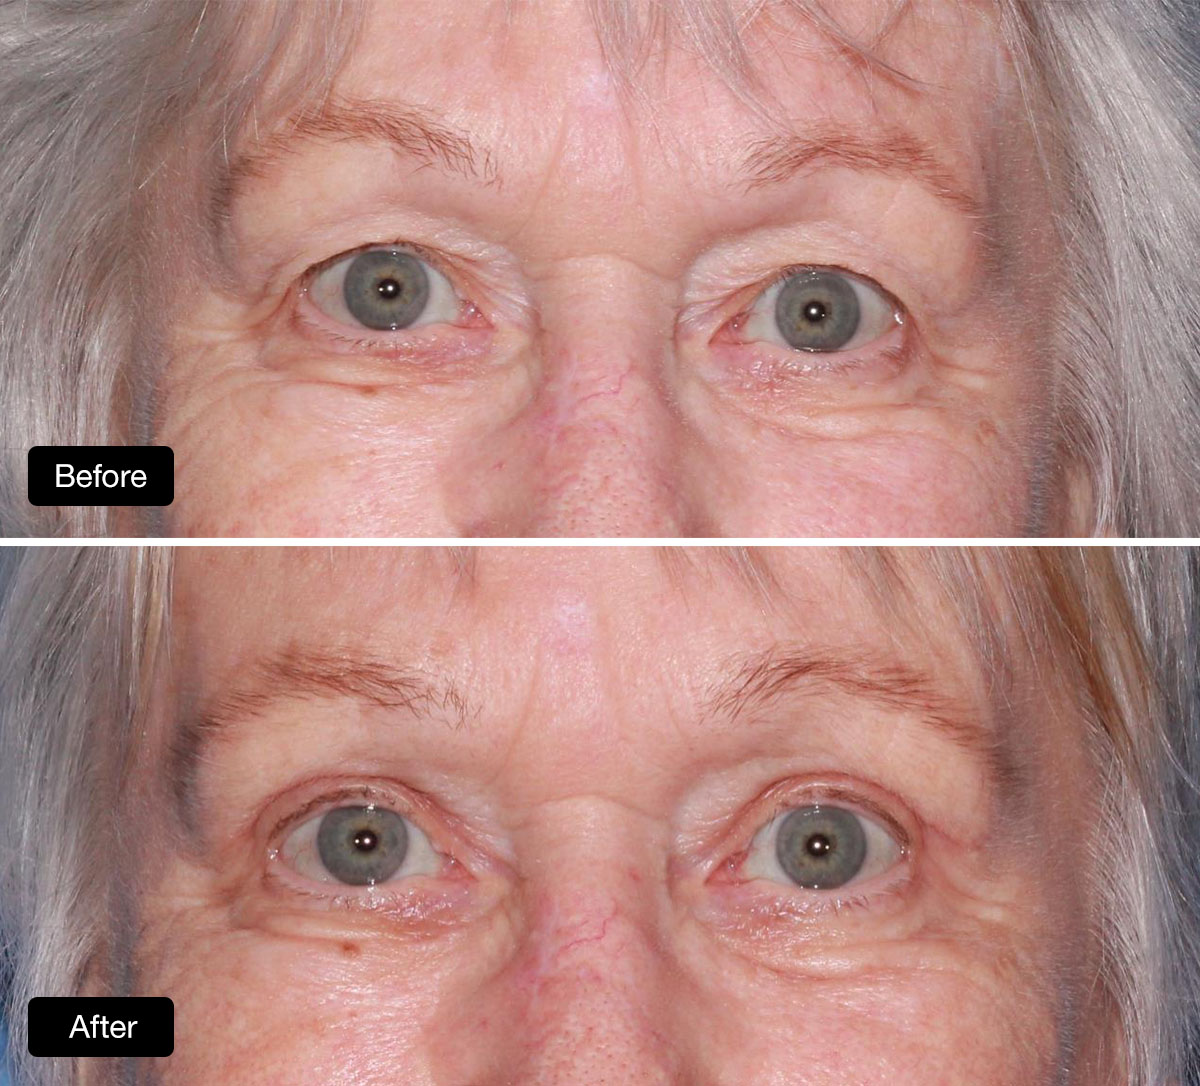 Upper blepharoplasty 81 year old patient before surgery and 6 weeks post surgery